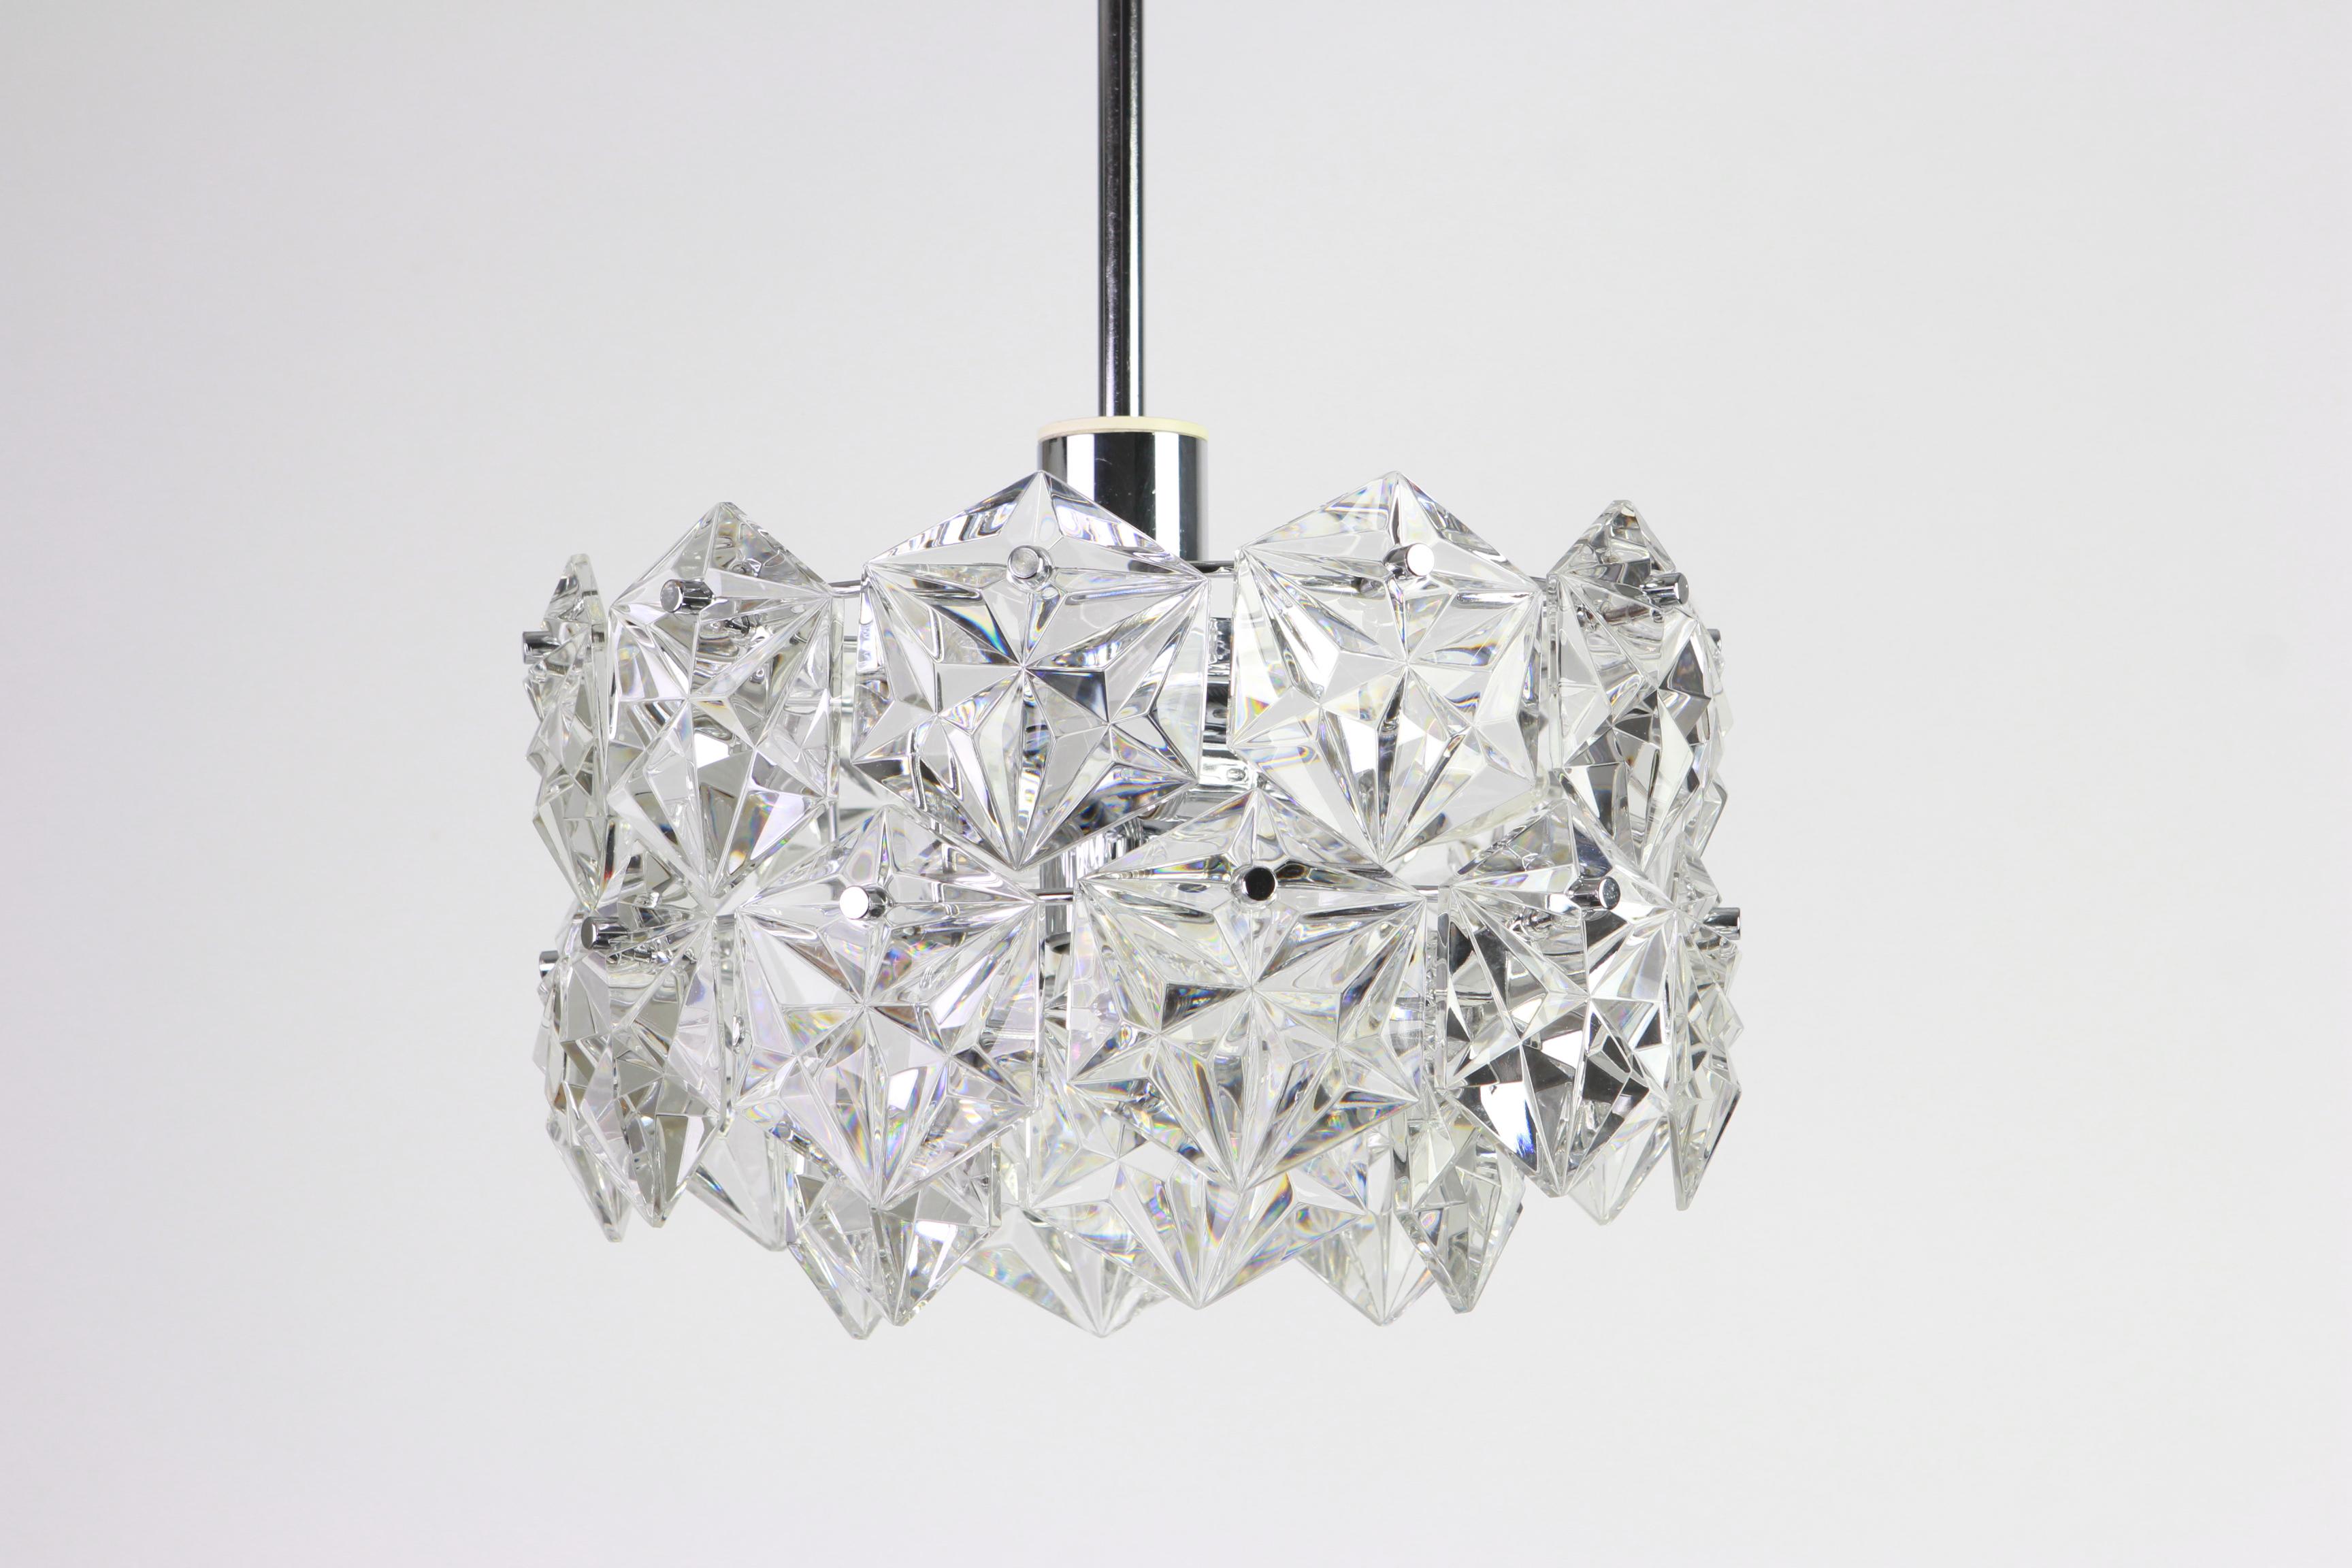 Late 20th Century 1 of 2 Stunning Chandelier, Chrome and Crystal Glass by Kinkeldey, Germany, 1970 For Sale